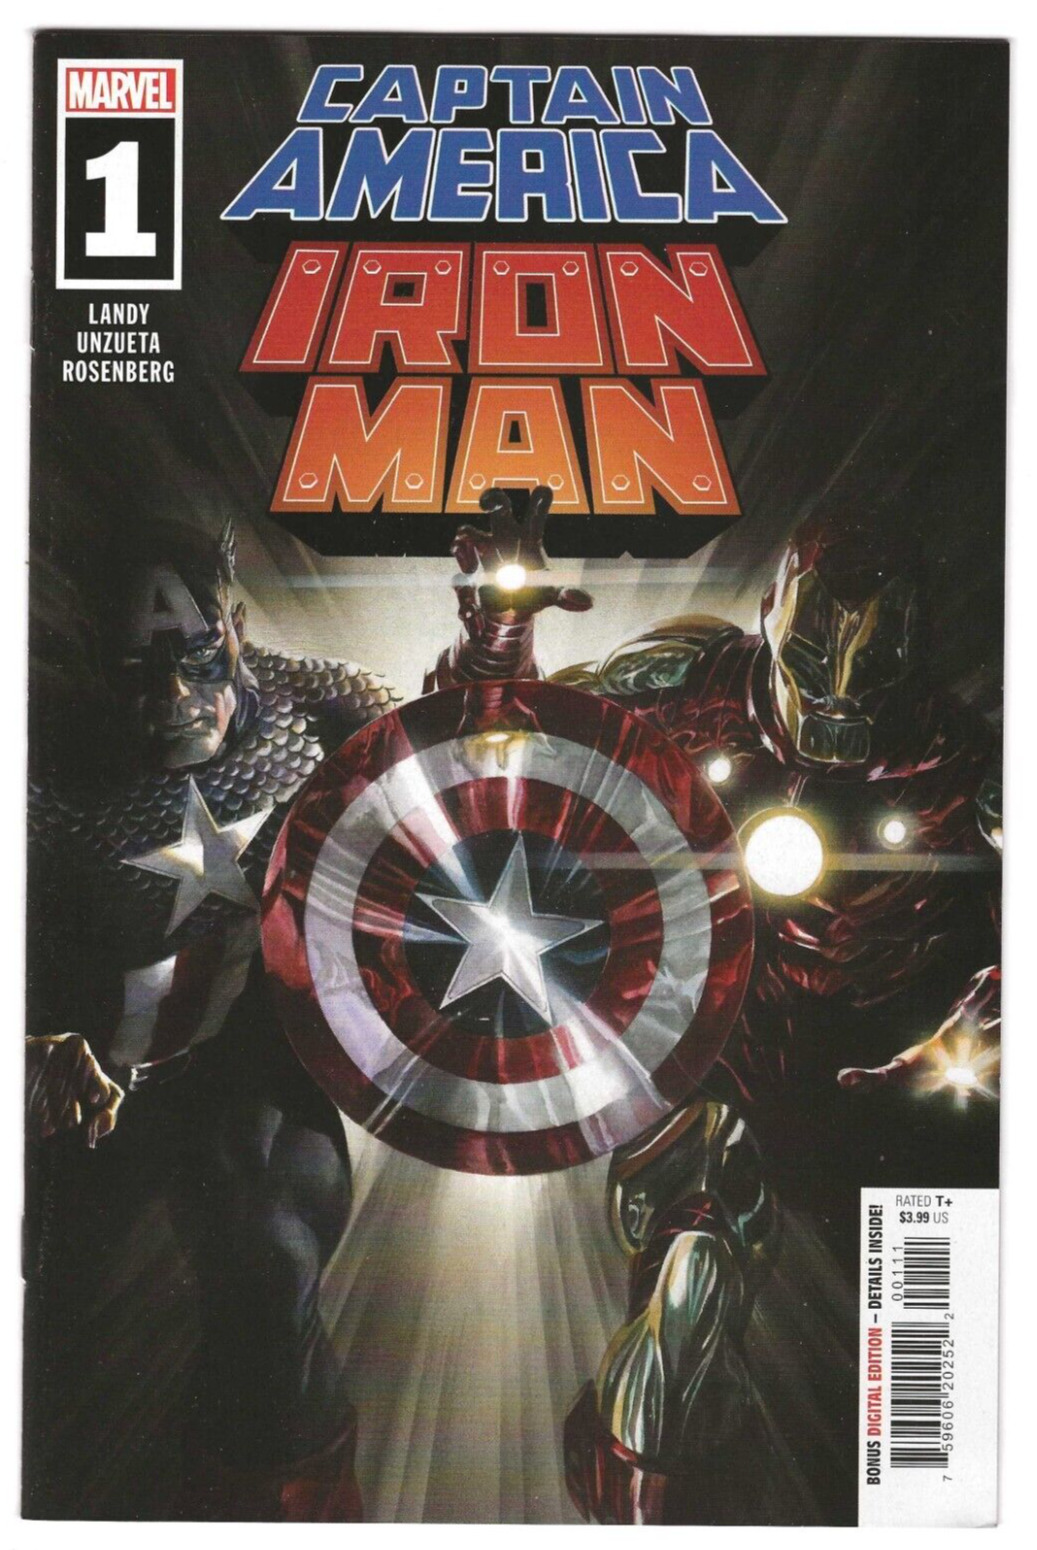 Marvel Comics CAPTAIN AMERICA IRON MAN #1 first printing cover A